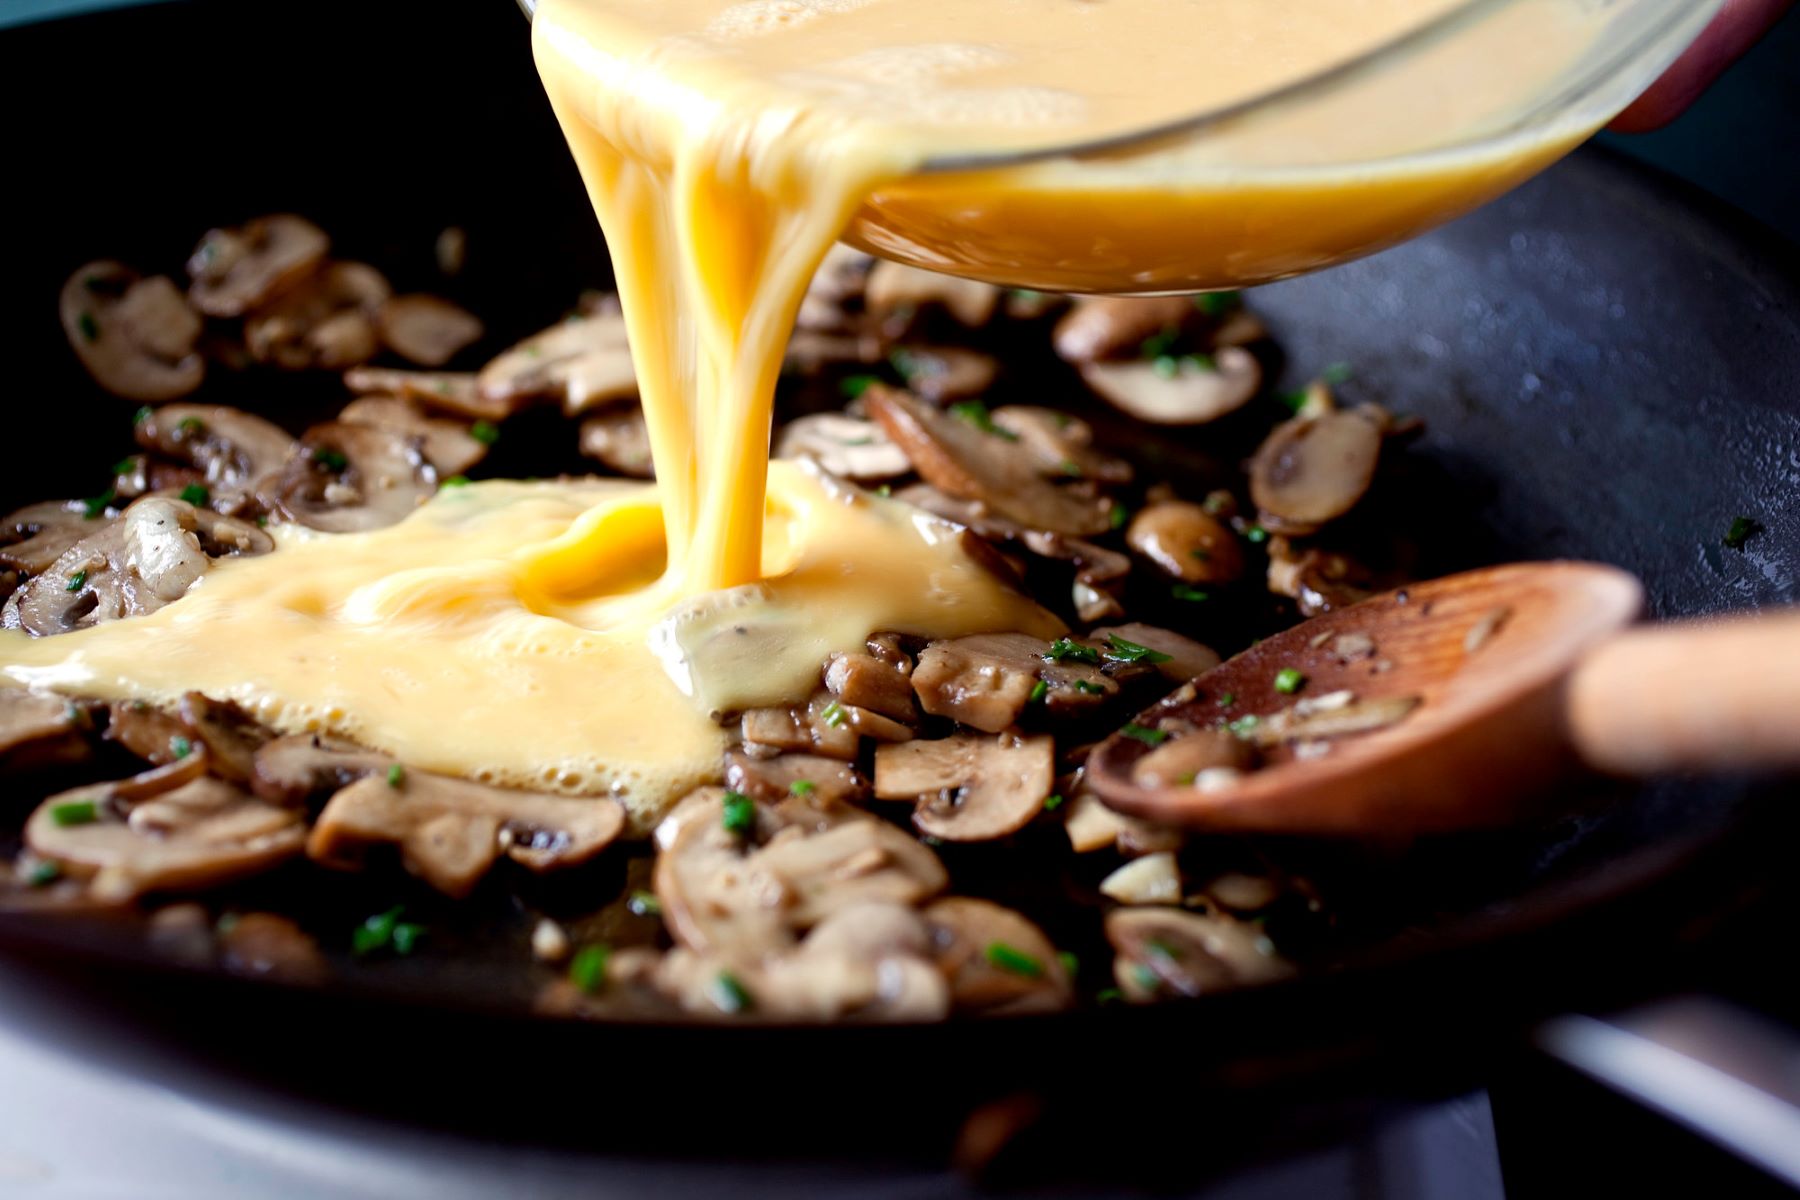 Delicious Mushroom And Butter Sauce With A Perfectly Cooked Egg